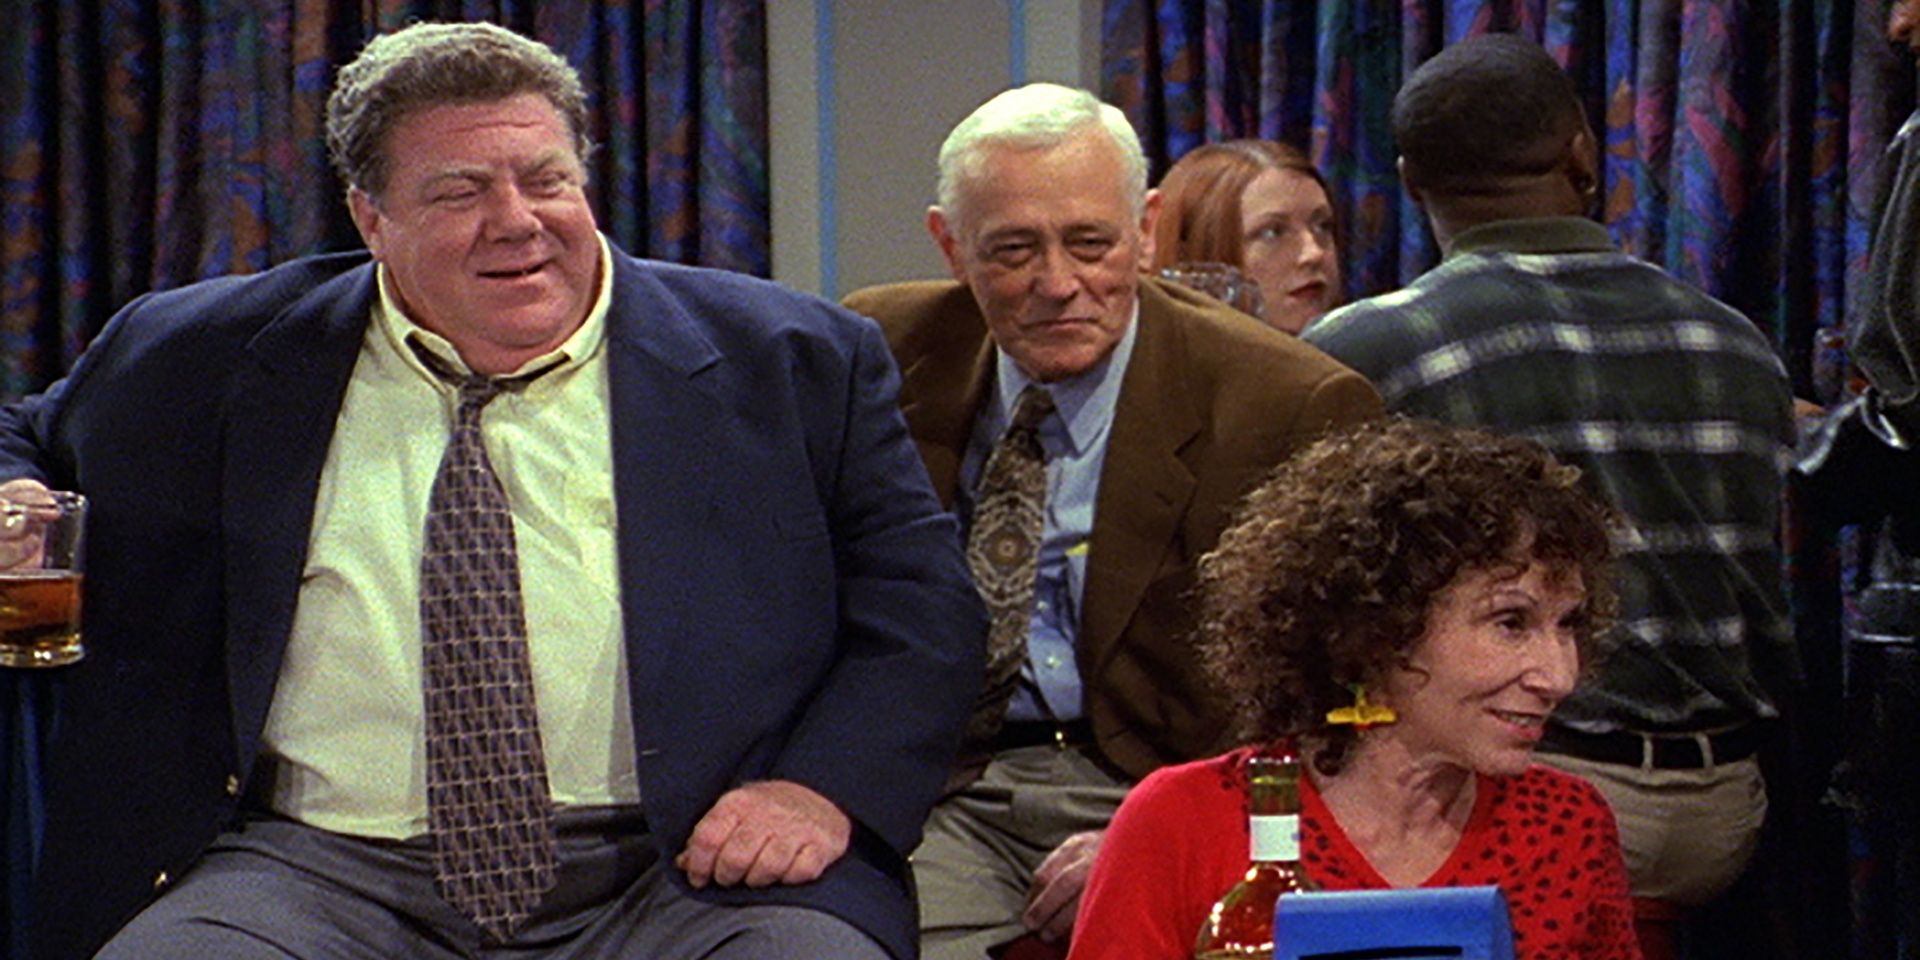 Norm Peterson, Martin Crane and Carla Tortelli in "Cheerful Goodbyes" on Frasier